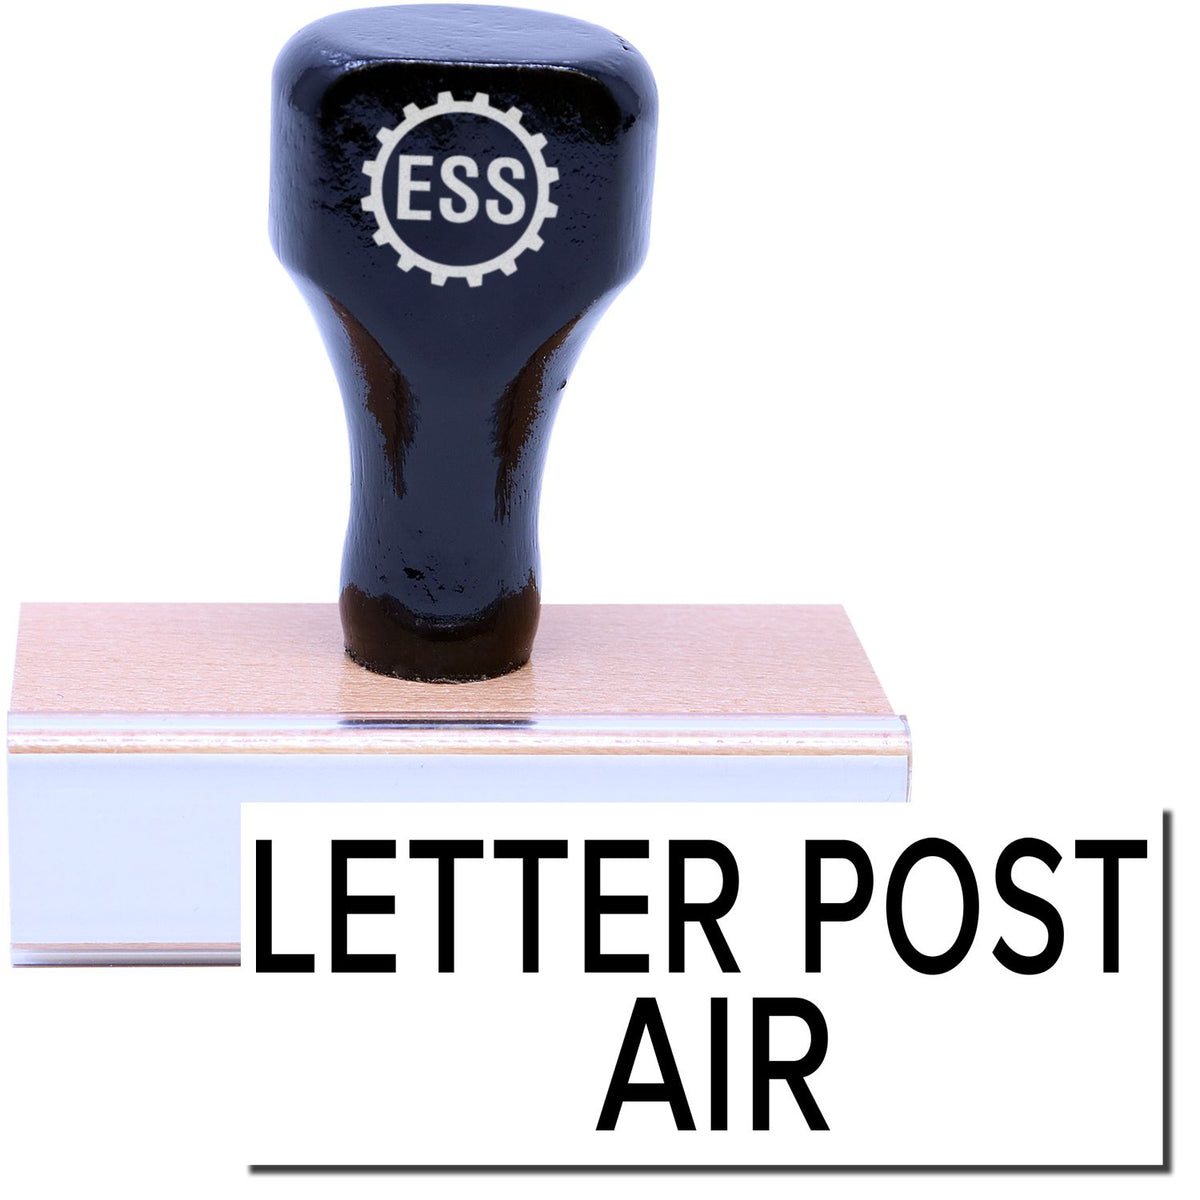 A stock office rubber stamp with a stamped image showing how the text &quot;LETTER POST AIR&quot; is displayed after stamping.